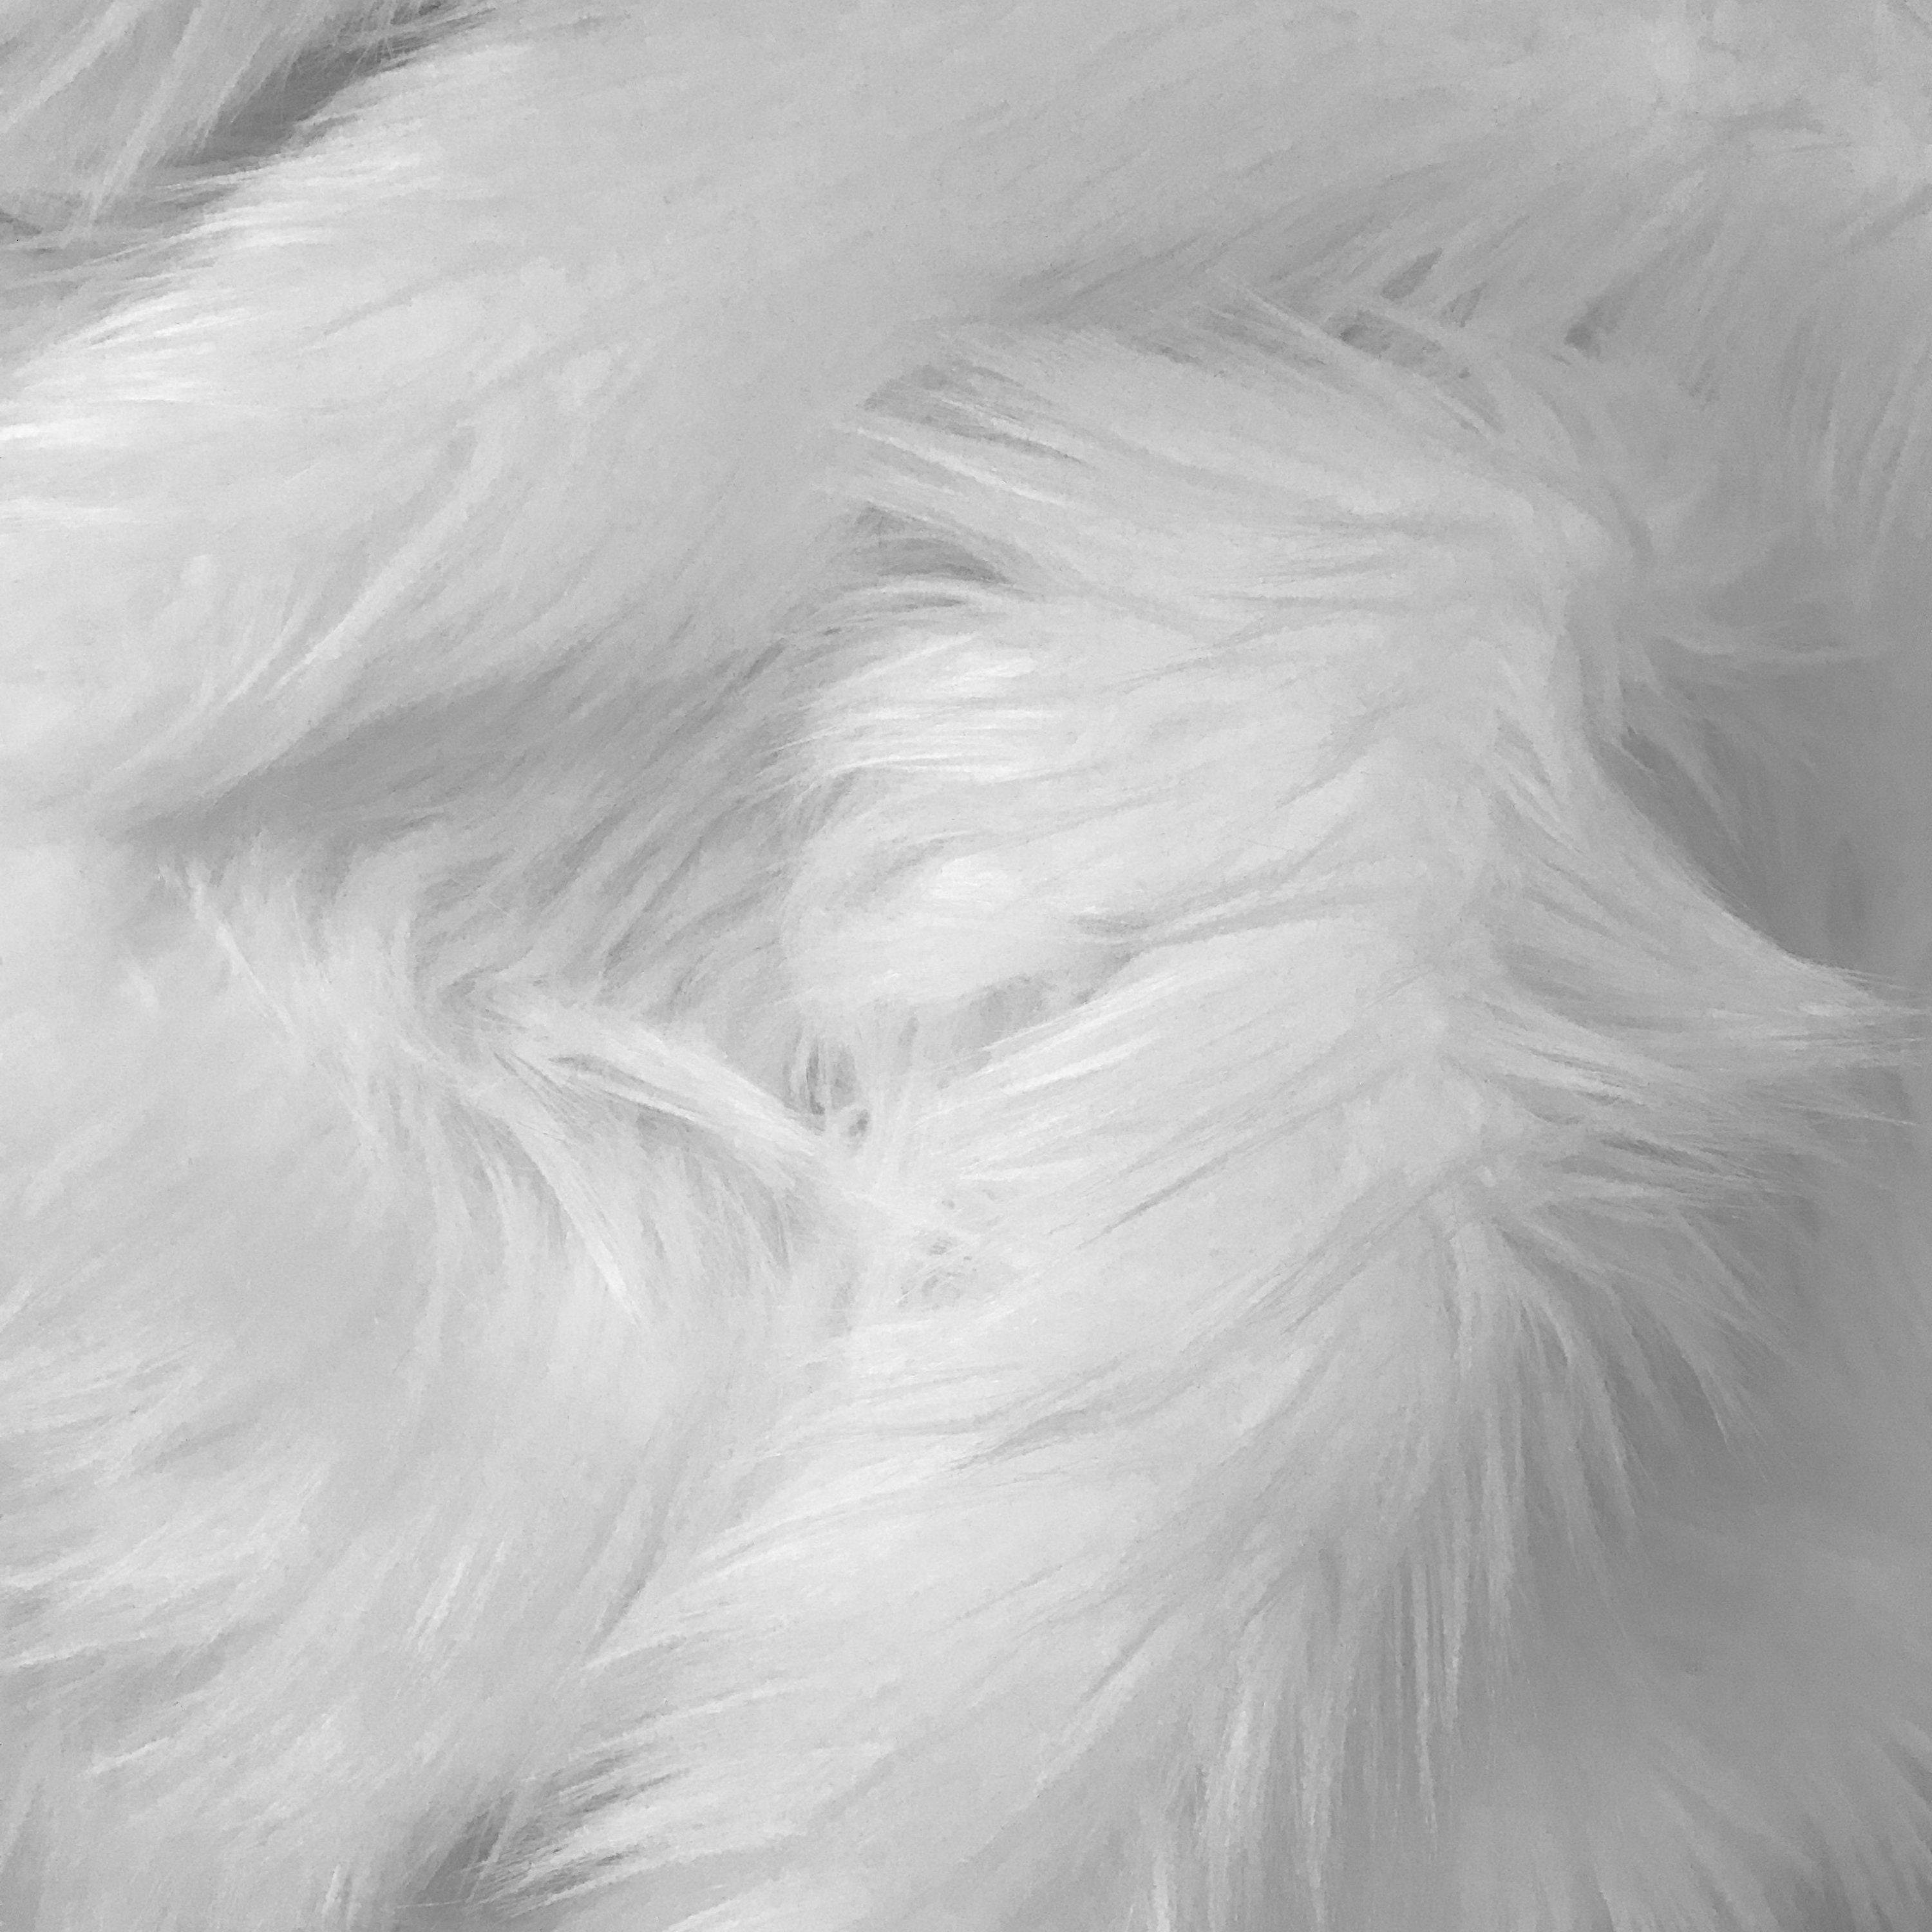 Bianna BLACK Long Pile Faux Fur Fabric, Shag Shaggy Material in Pieces,  Perfect for Gnome Beards Crafts, Fursuit, Costume 